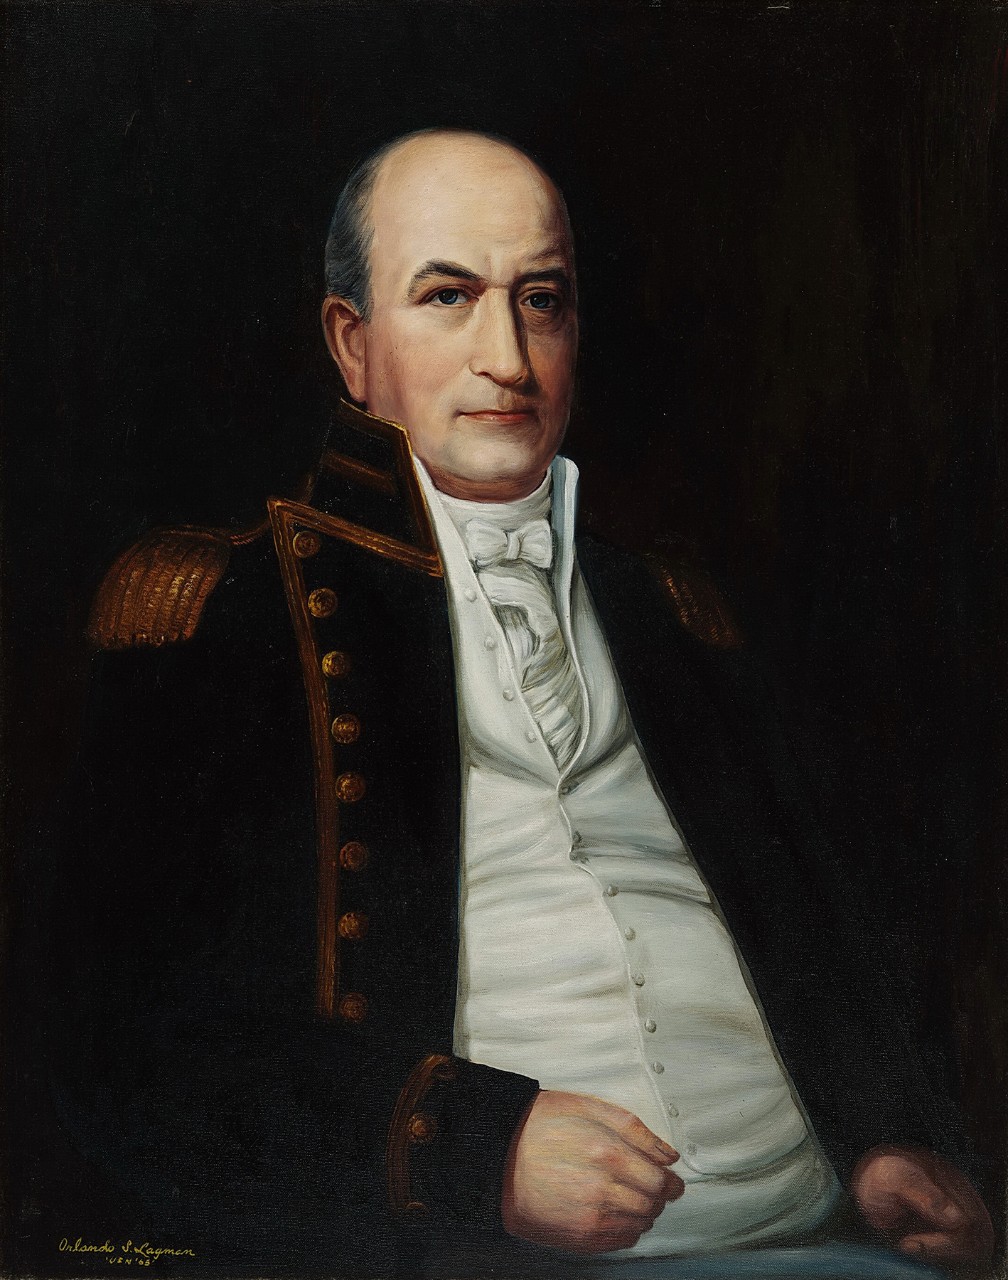 Portrait of Thomas Tingey, he is seated, wearing a naval uniform with a dark background